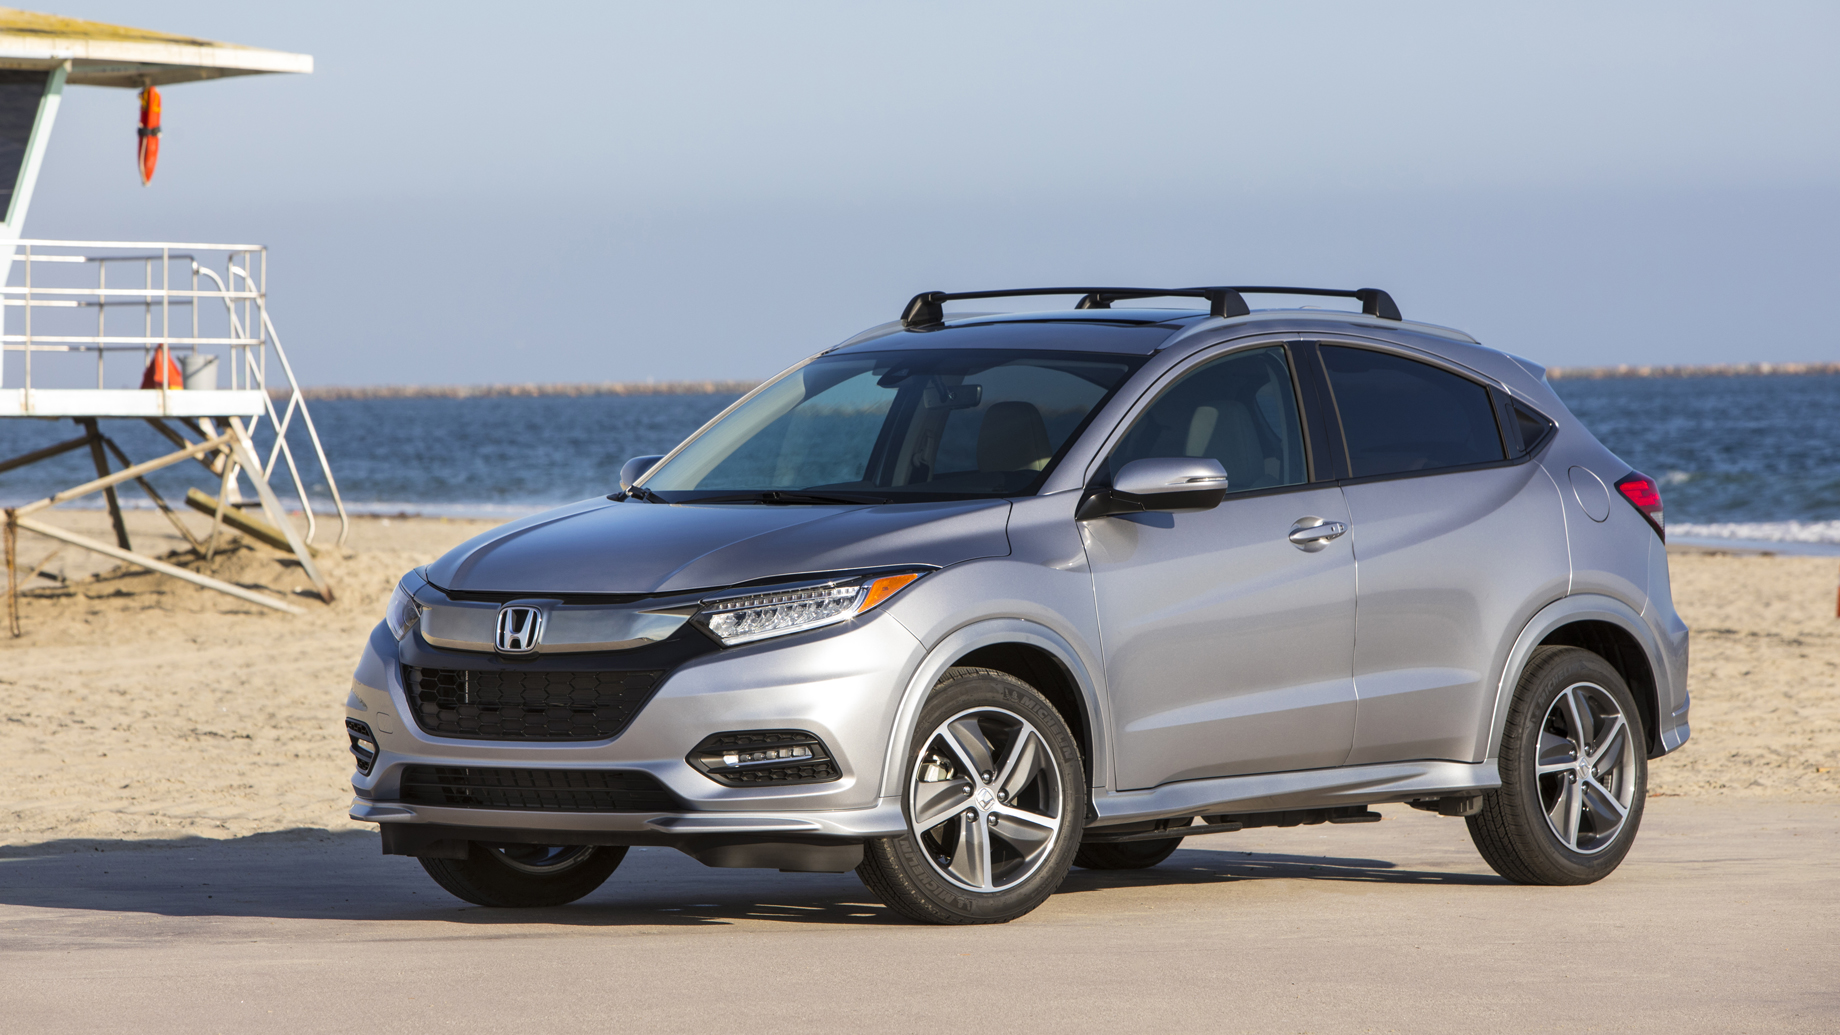 2019 Honda HR-V Review Price specs features and photos 